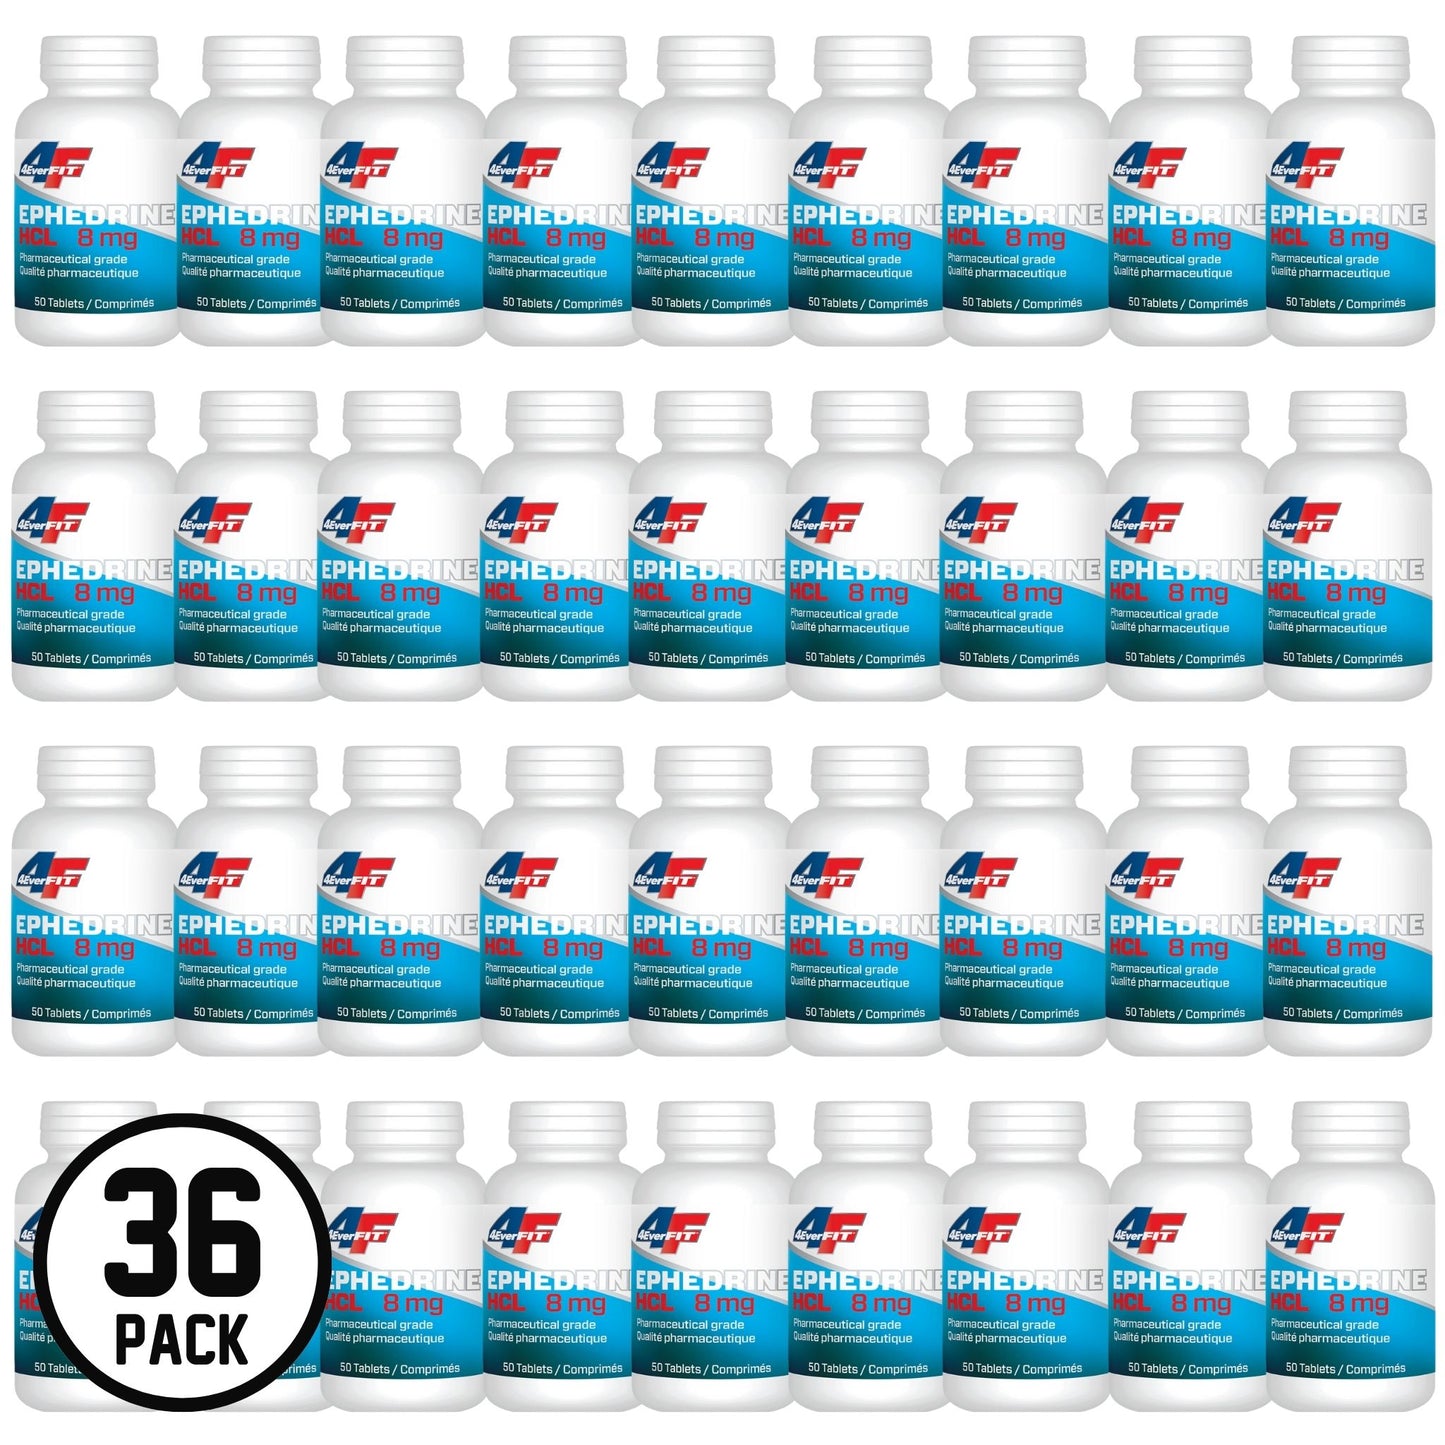 4Ever Fit Ephedrine 8mg (Ships within Canada Only)